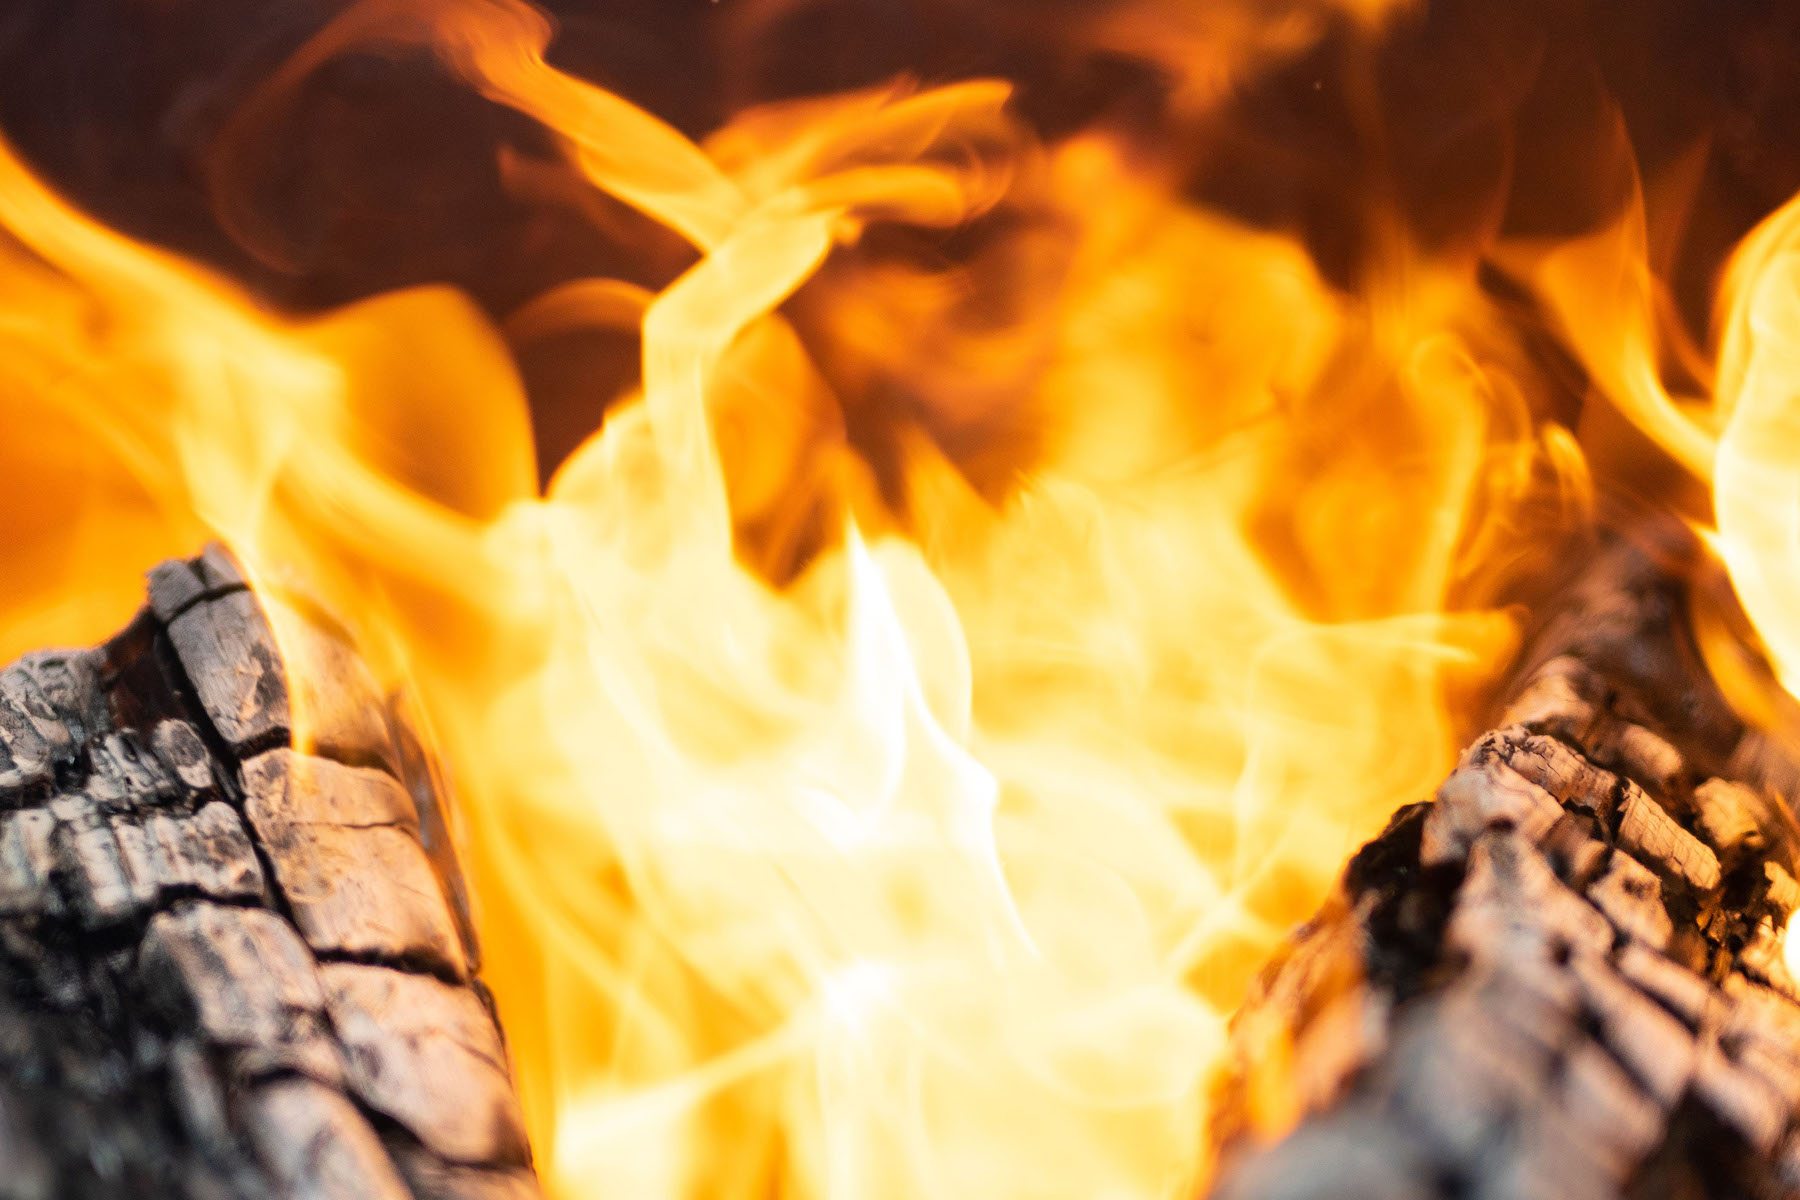 A close up image of two logs in a crackling fire.